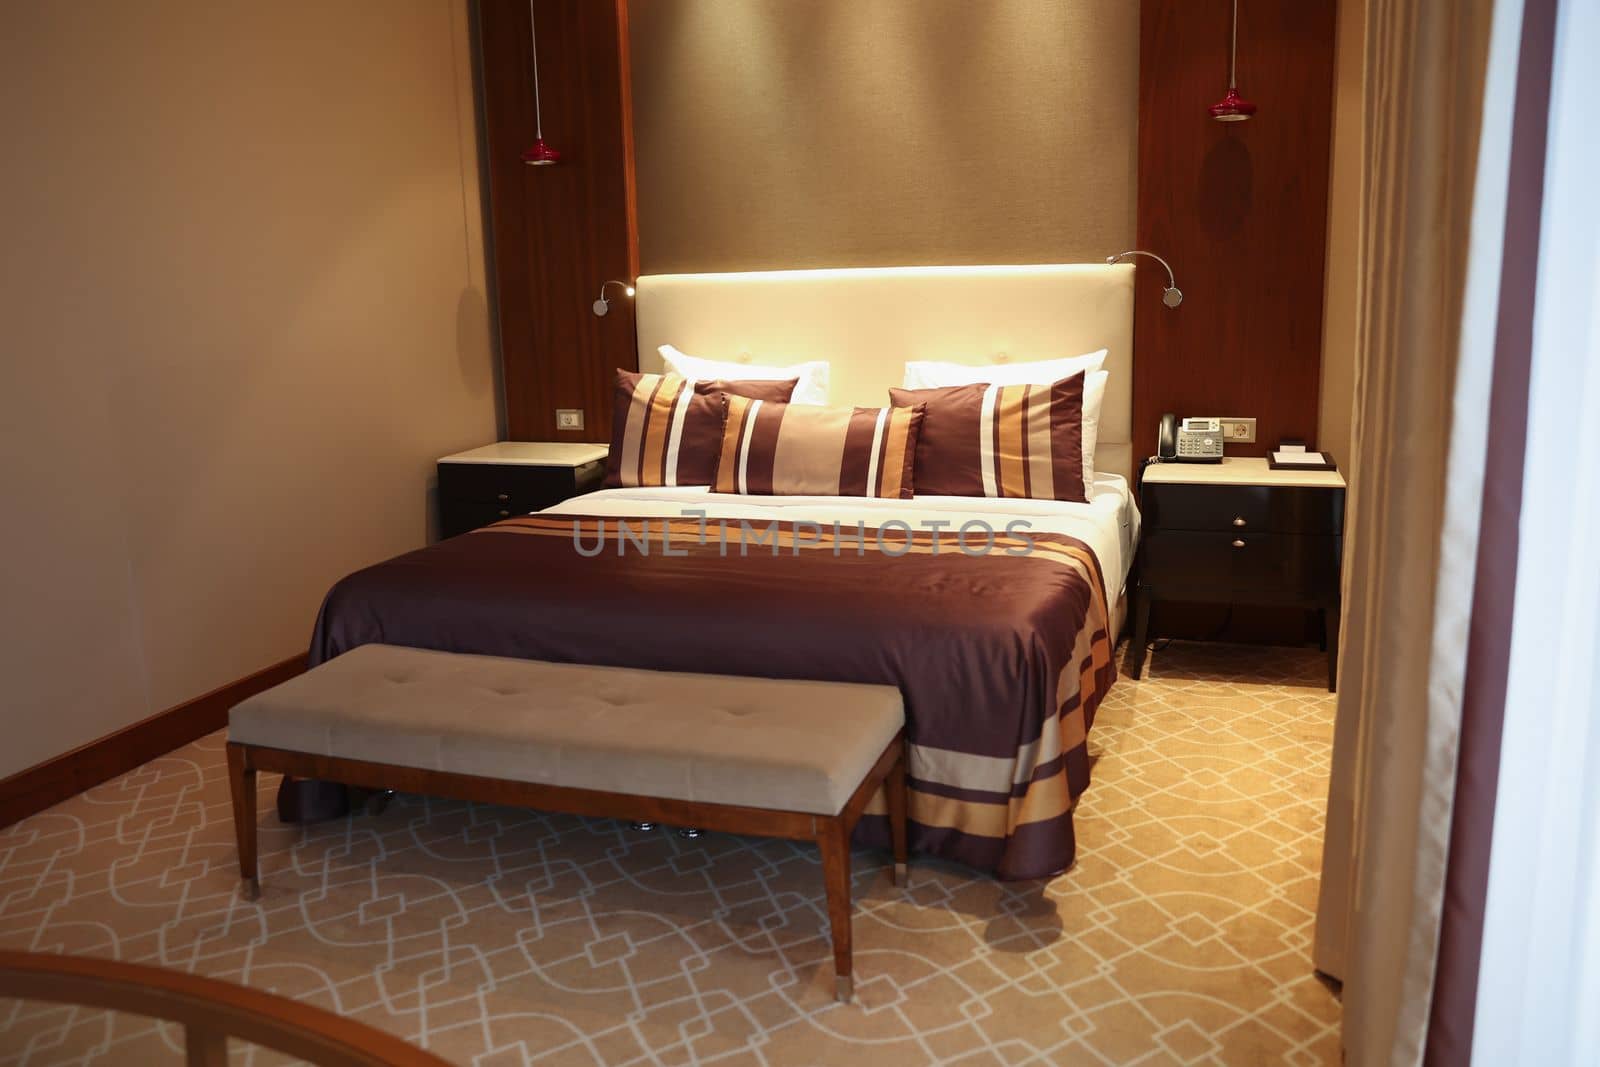 Bed with brown linens in hotel room. Interior design concept